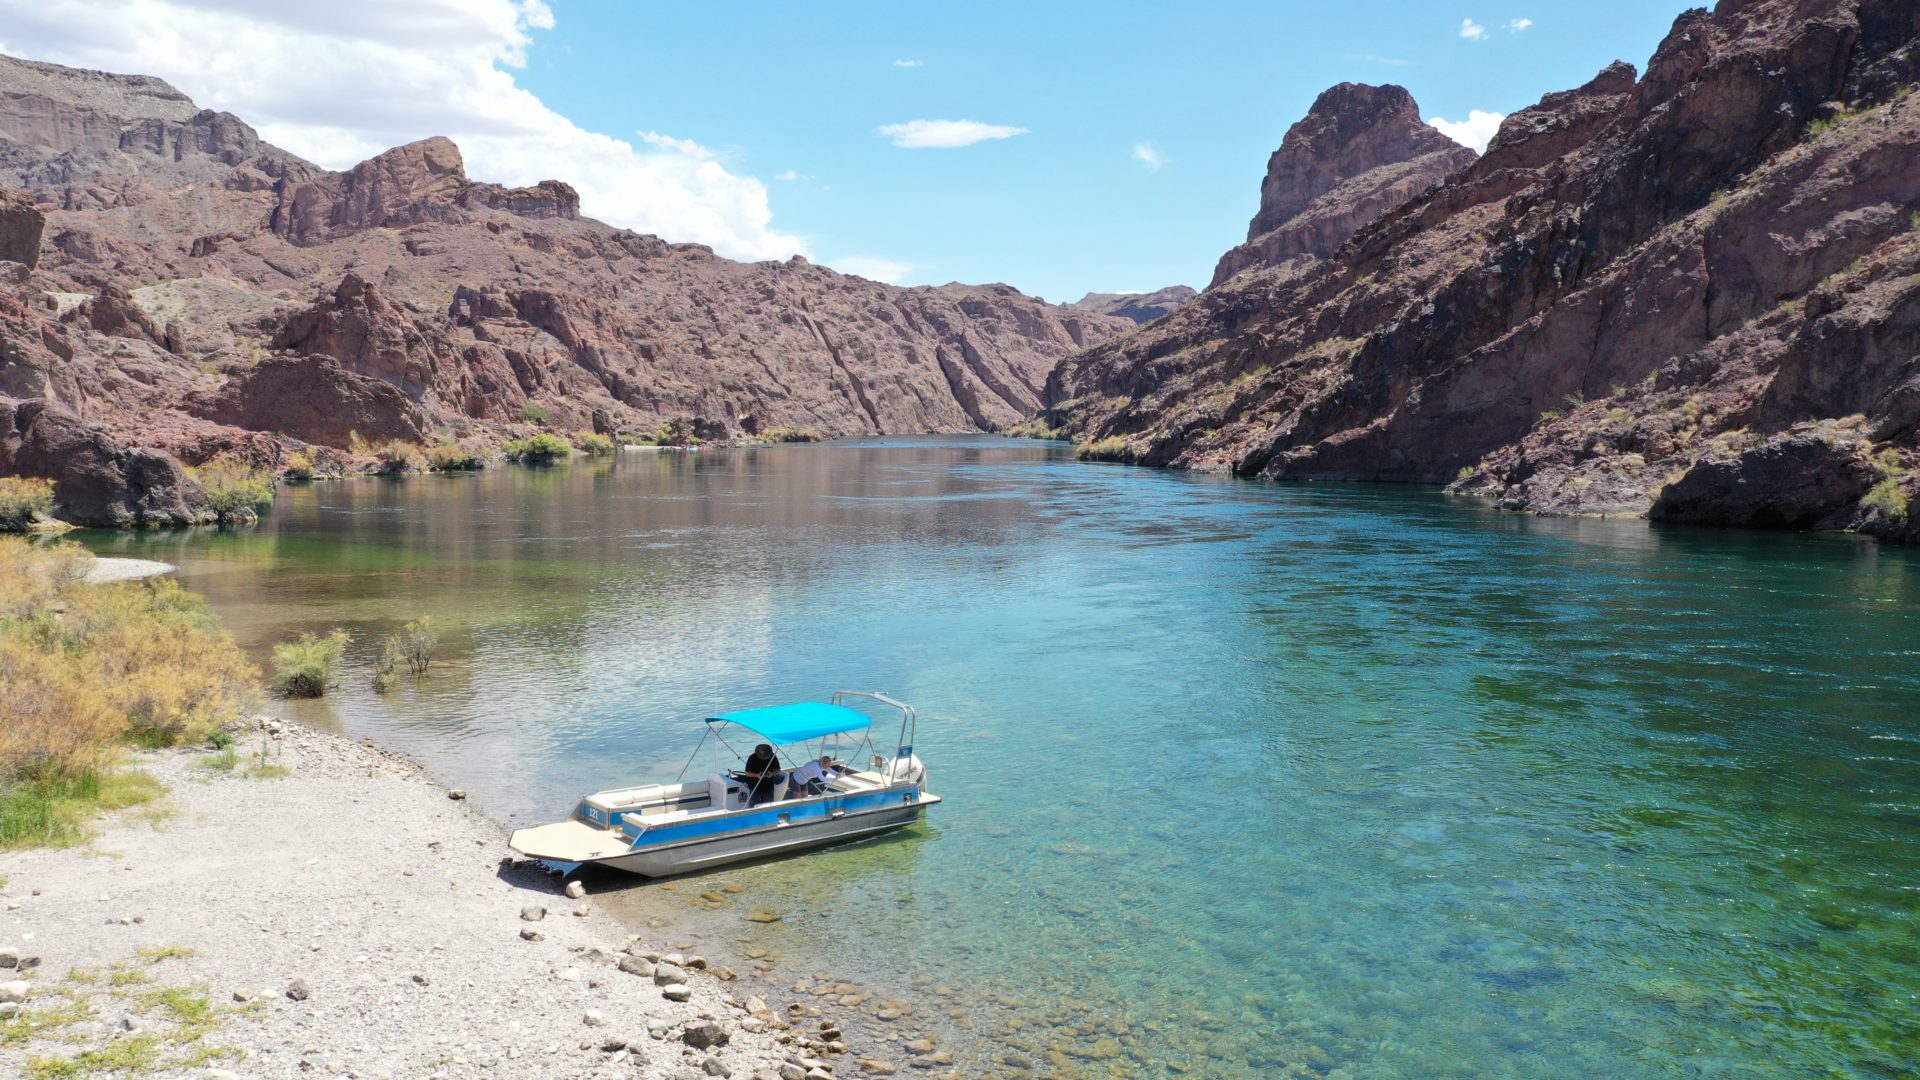 Lake Mead National Recreation Area features a body of water along the rugged desert landscapes and towering cliffs with a boat along the shore